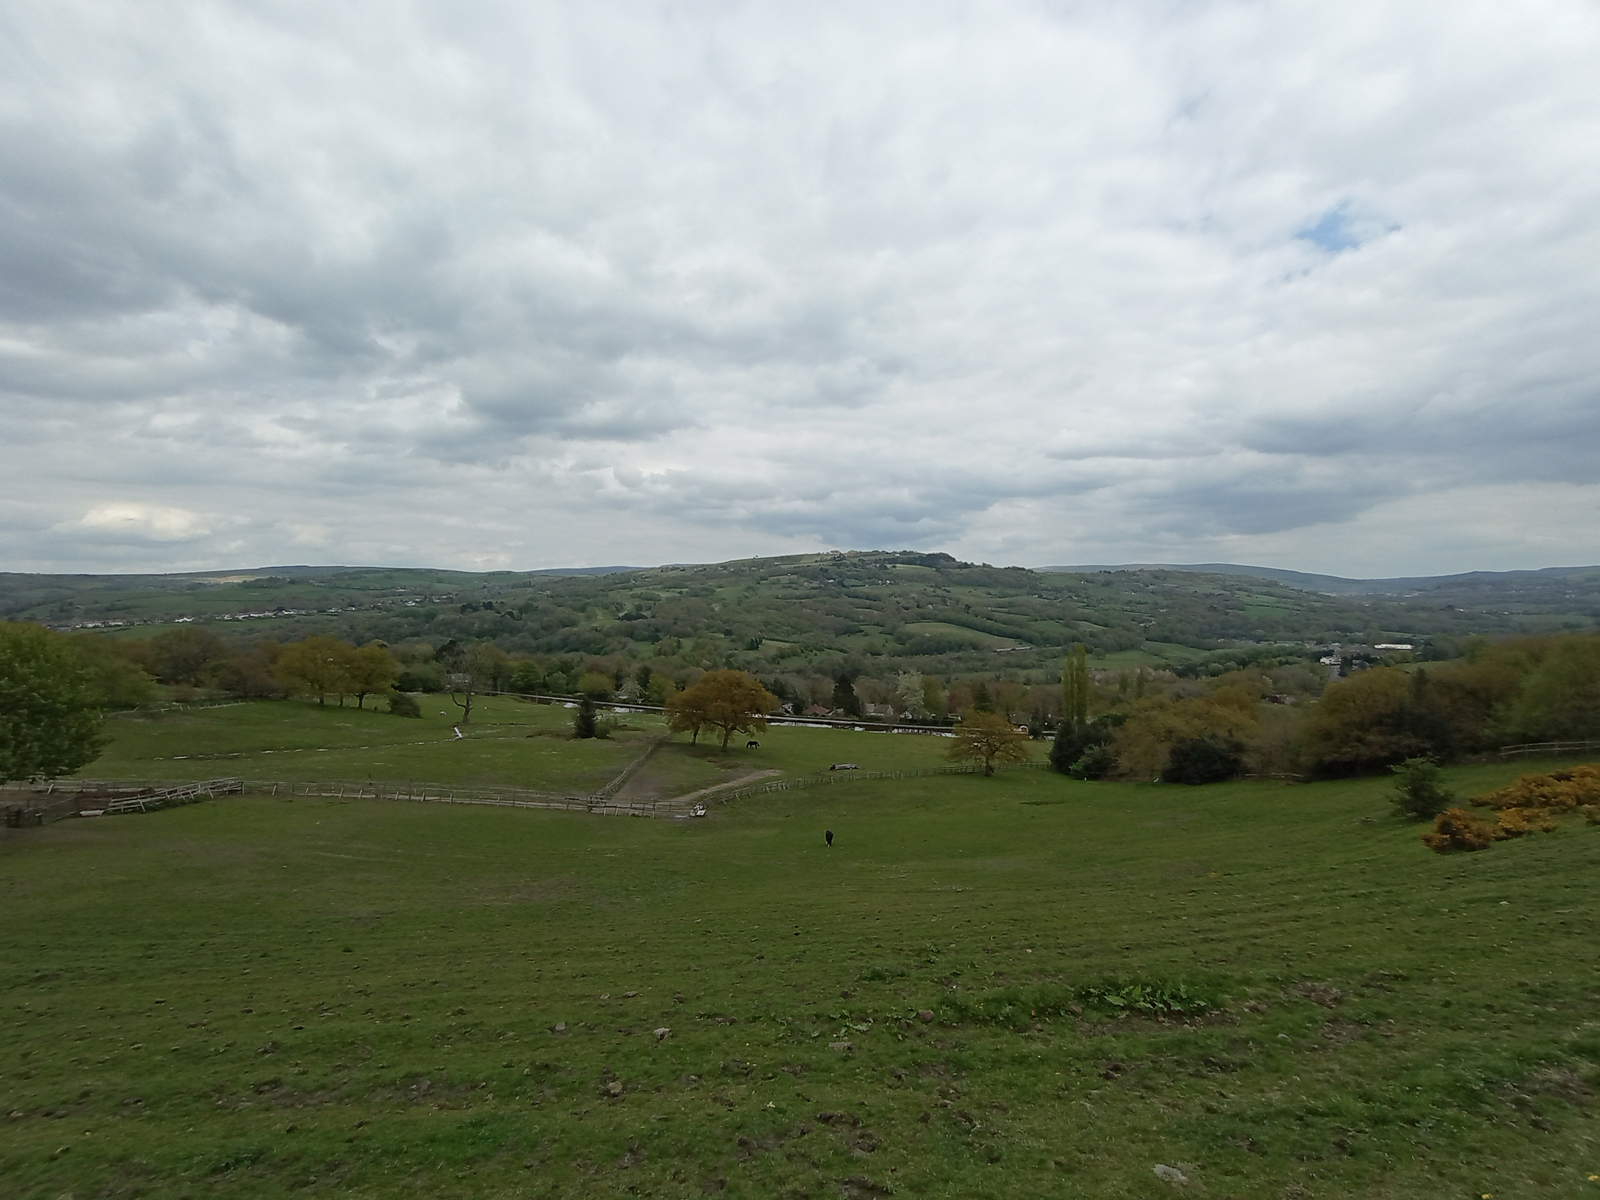 Moto G22 camera sample showing a hilly landscape in ultrawide